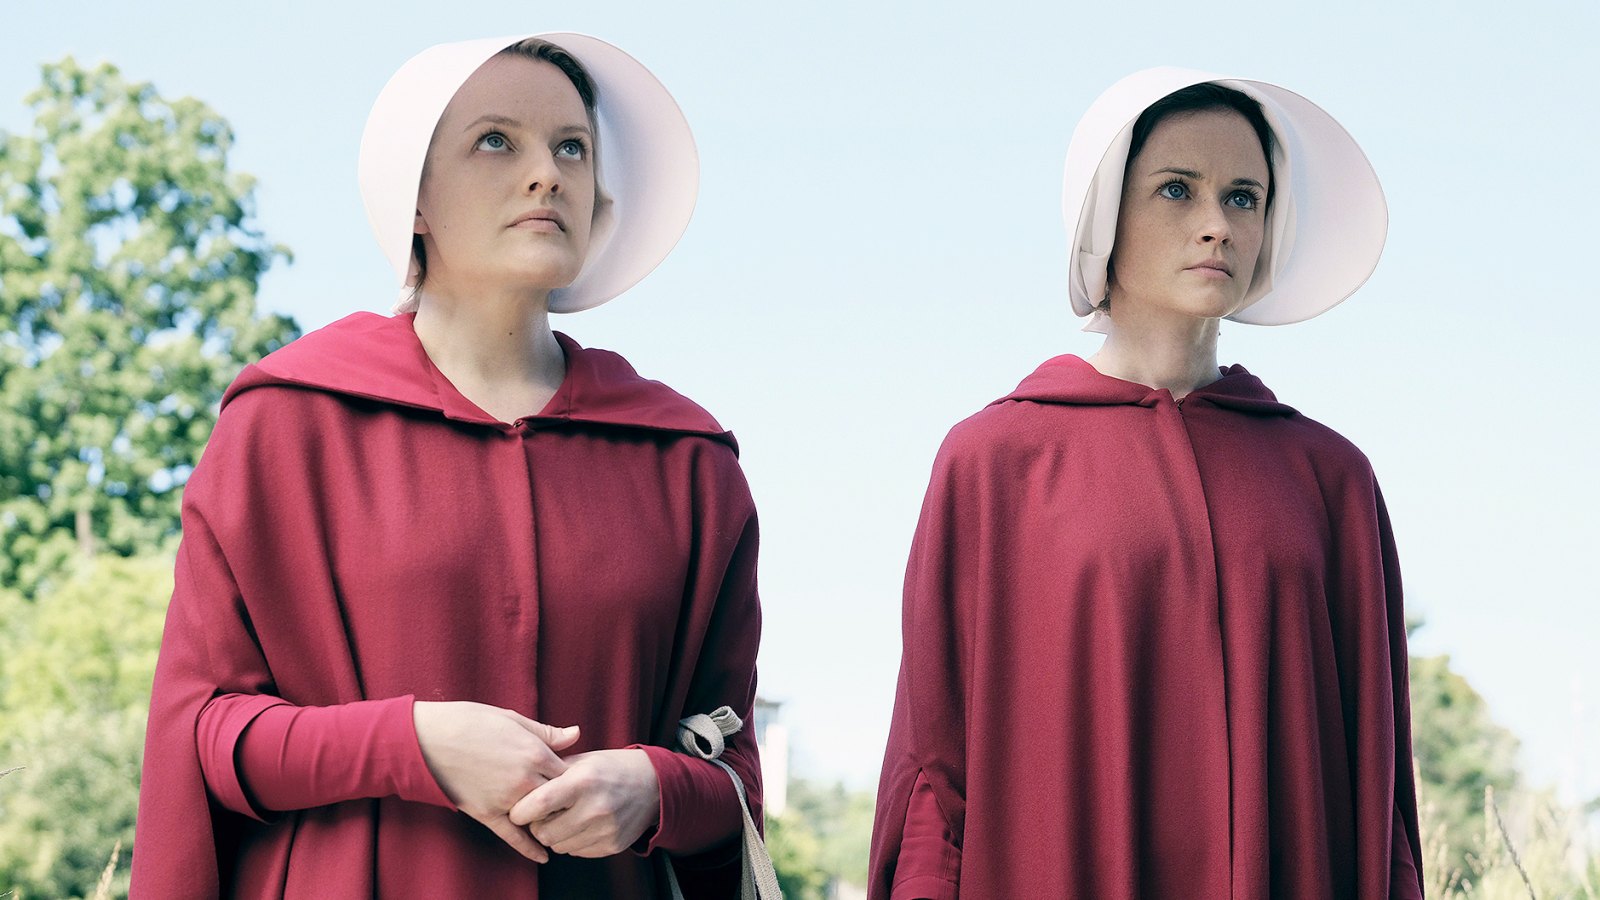 Offred Handmaid's Tale Costume